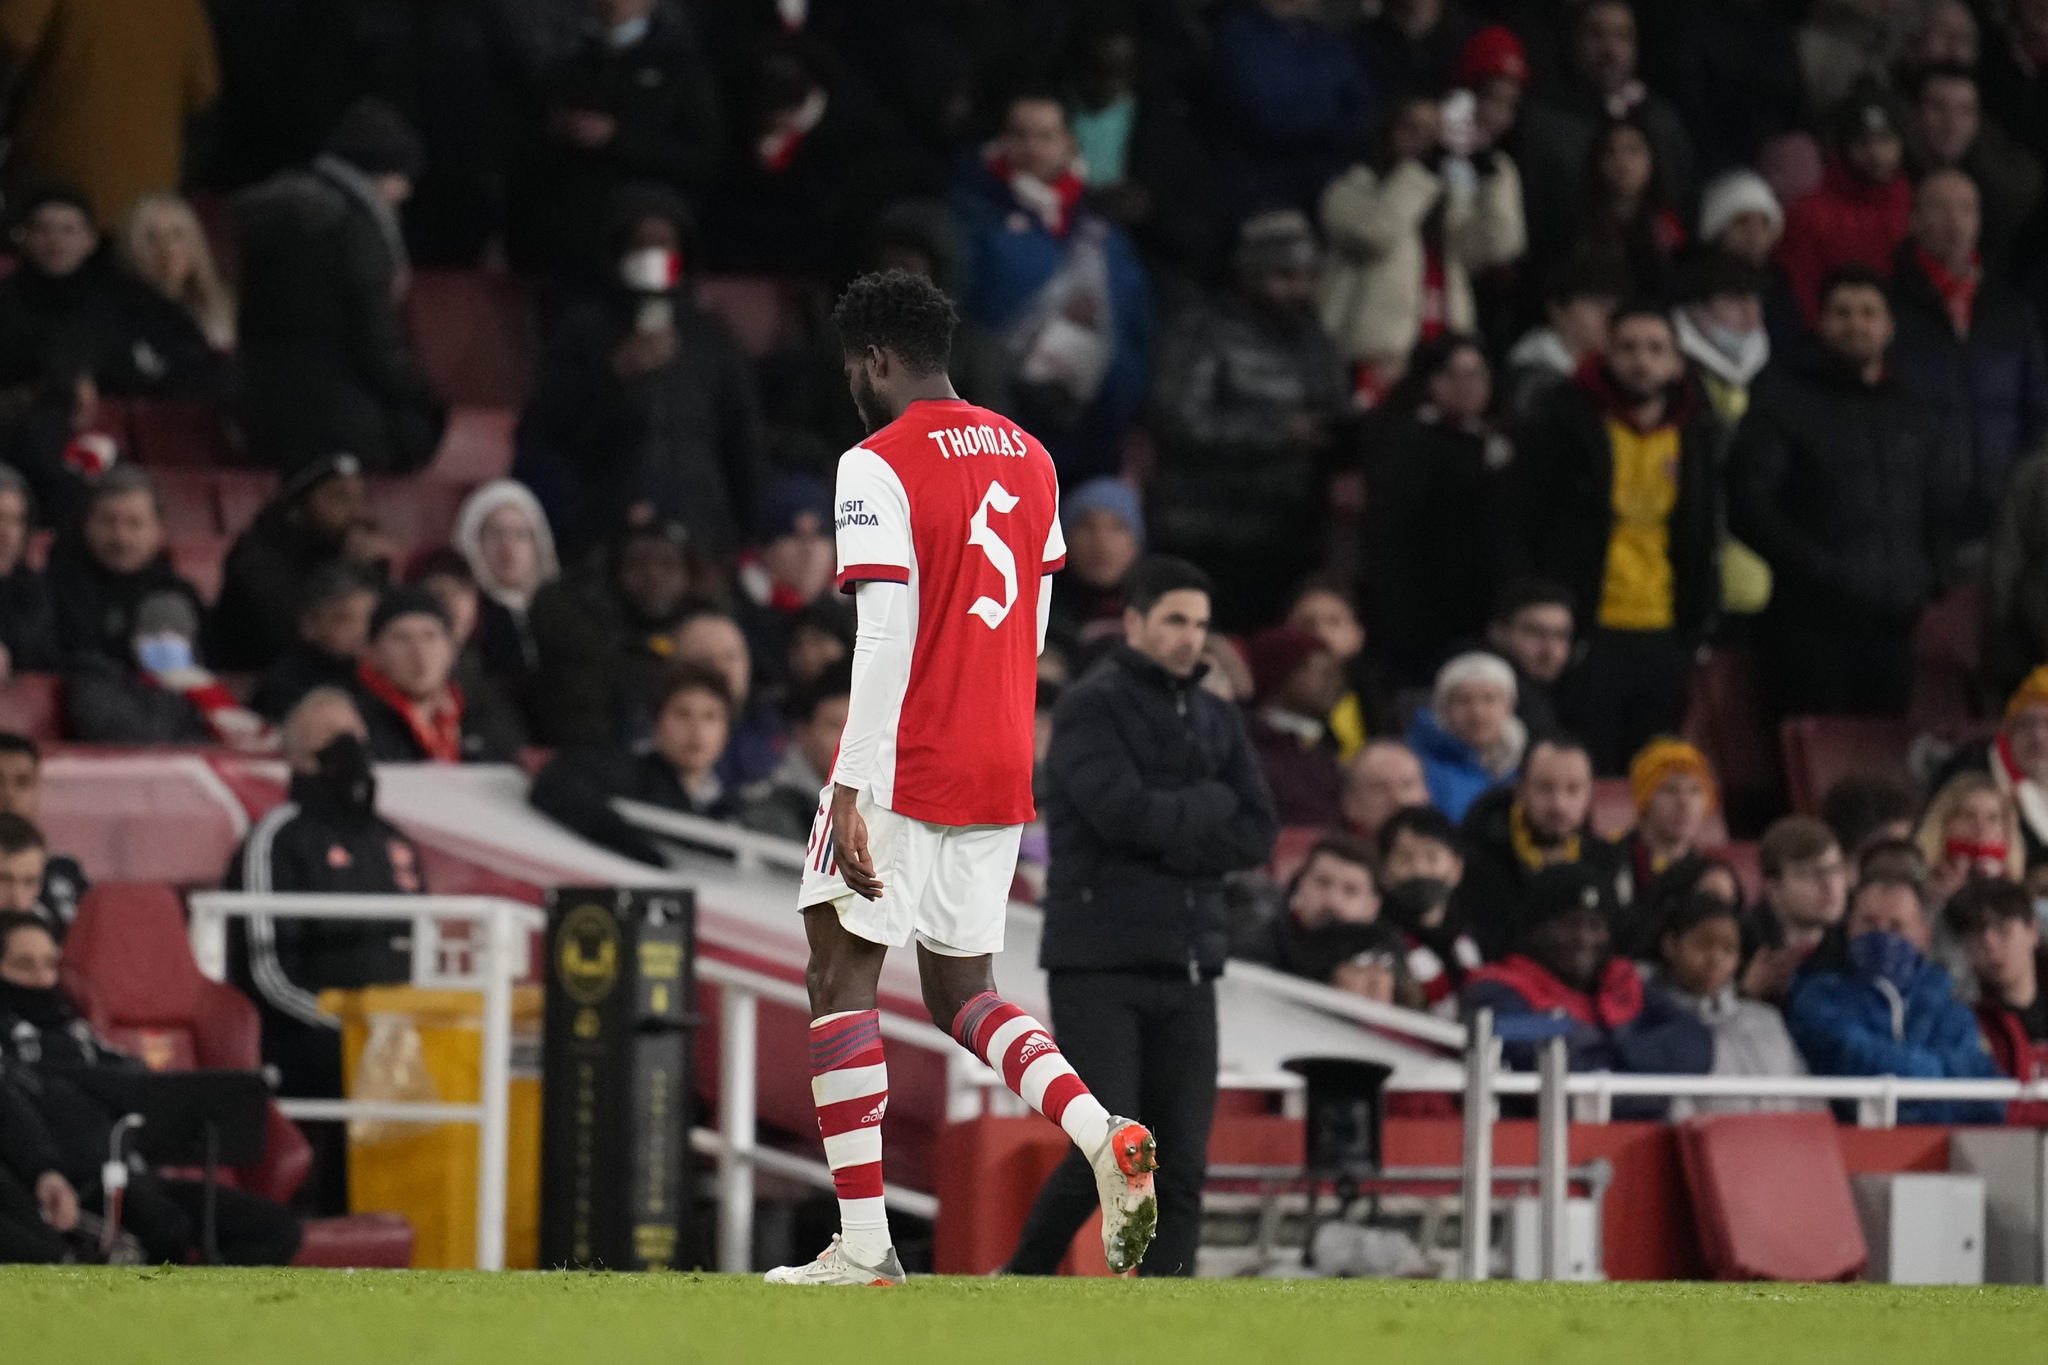 Arsenal's Thomas Partey leaves the pitch after a red card